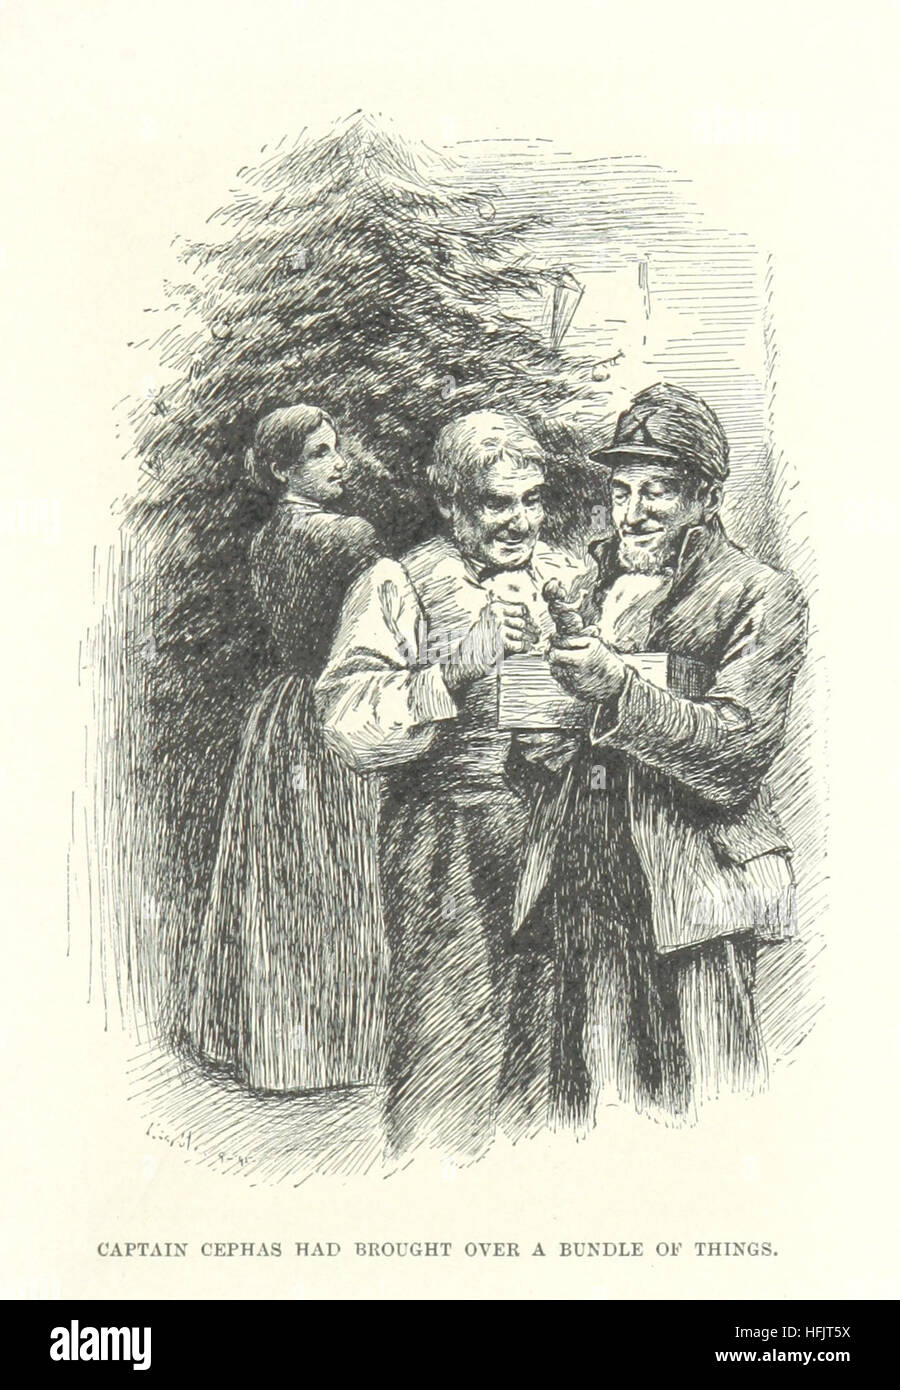 Image taken from page 225 of 'A Story-Teller's Pack ... Illustrated, etc' Image taken from page 225 of 'A Story-Teller's Pack Stock Photo